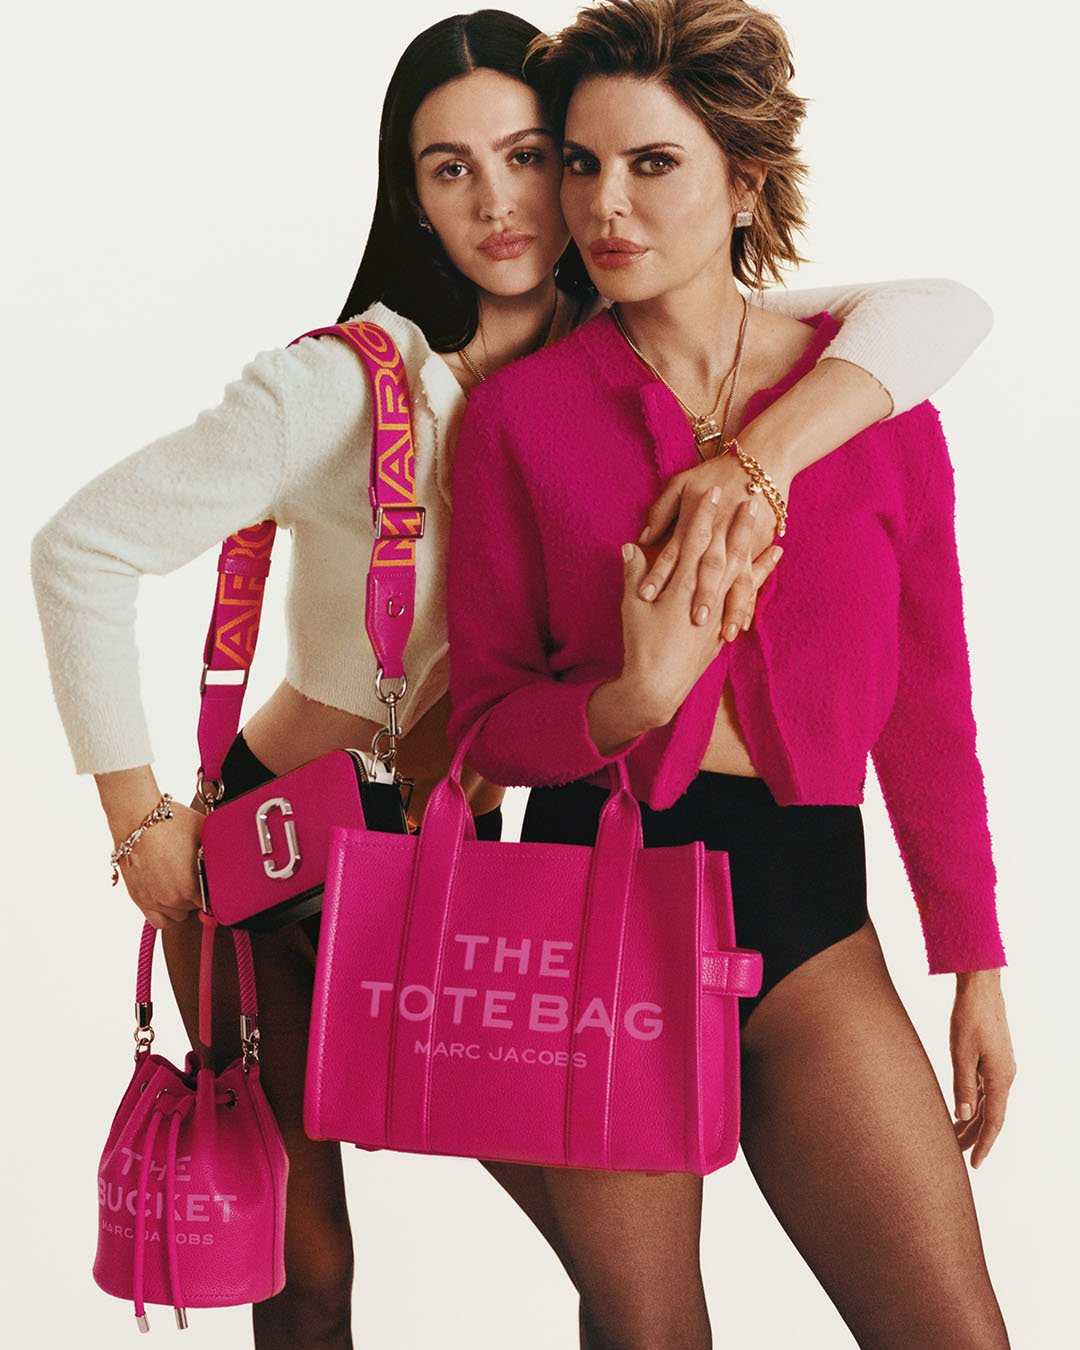 Lisa and Amelia with hot pink totes